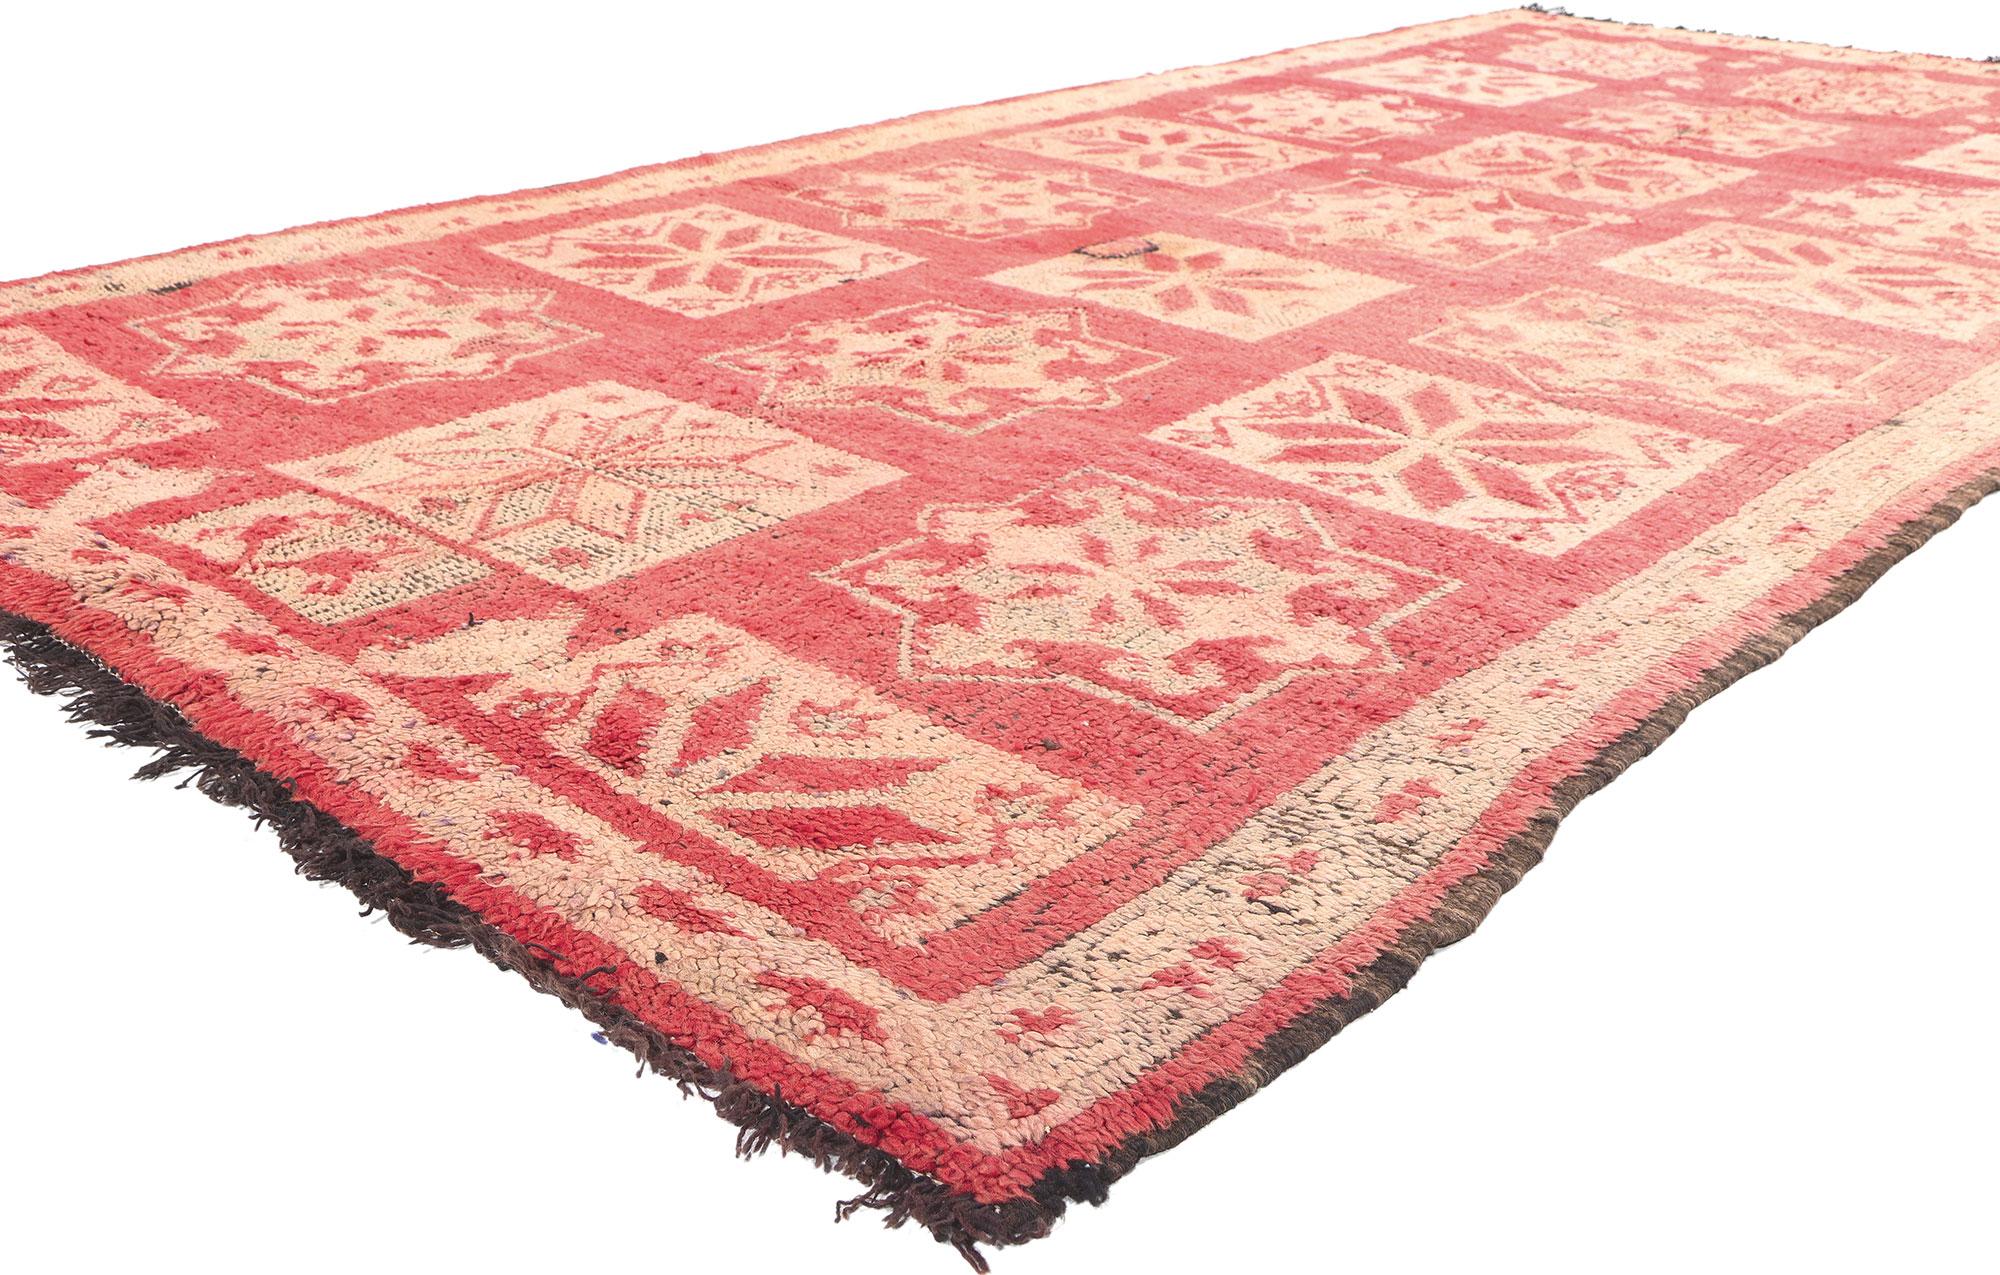 20982 Vintage Boujad Moroccan Rug, 05'06 x 11'04. Embark on an enchanting odyssey of Moorish elegance with each step upon this hand-knotted wool vintage Boujad Moroccan rug, originating from the vibrant city of Boujad in the Khouribga region,